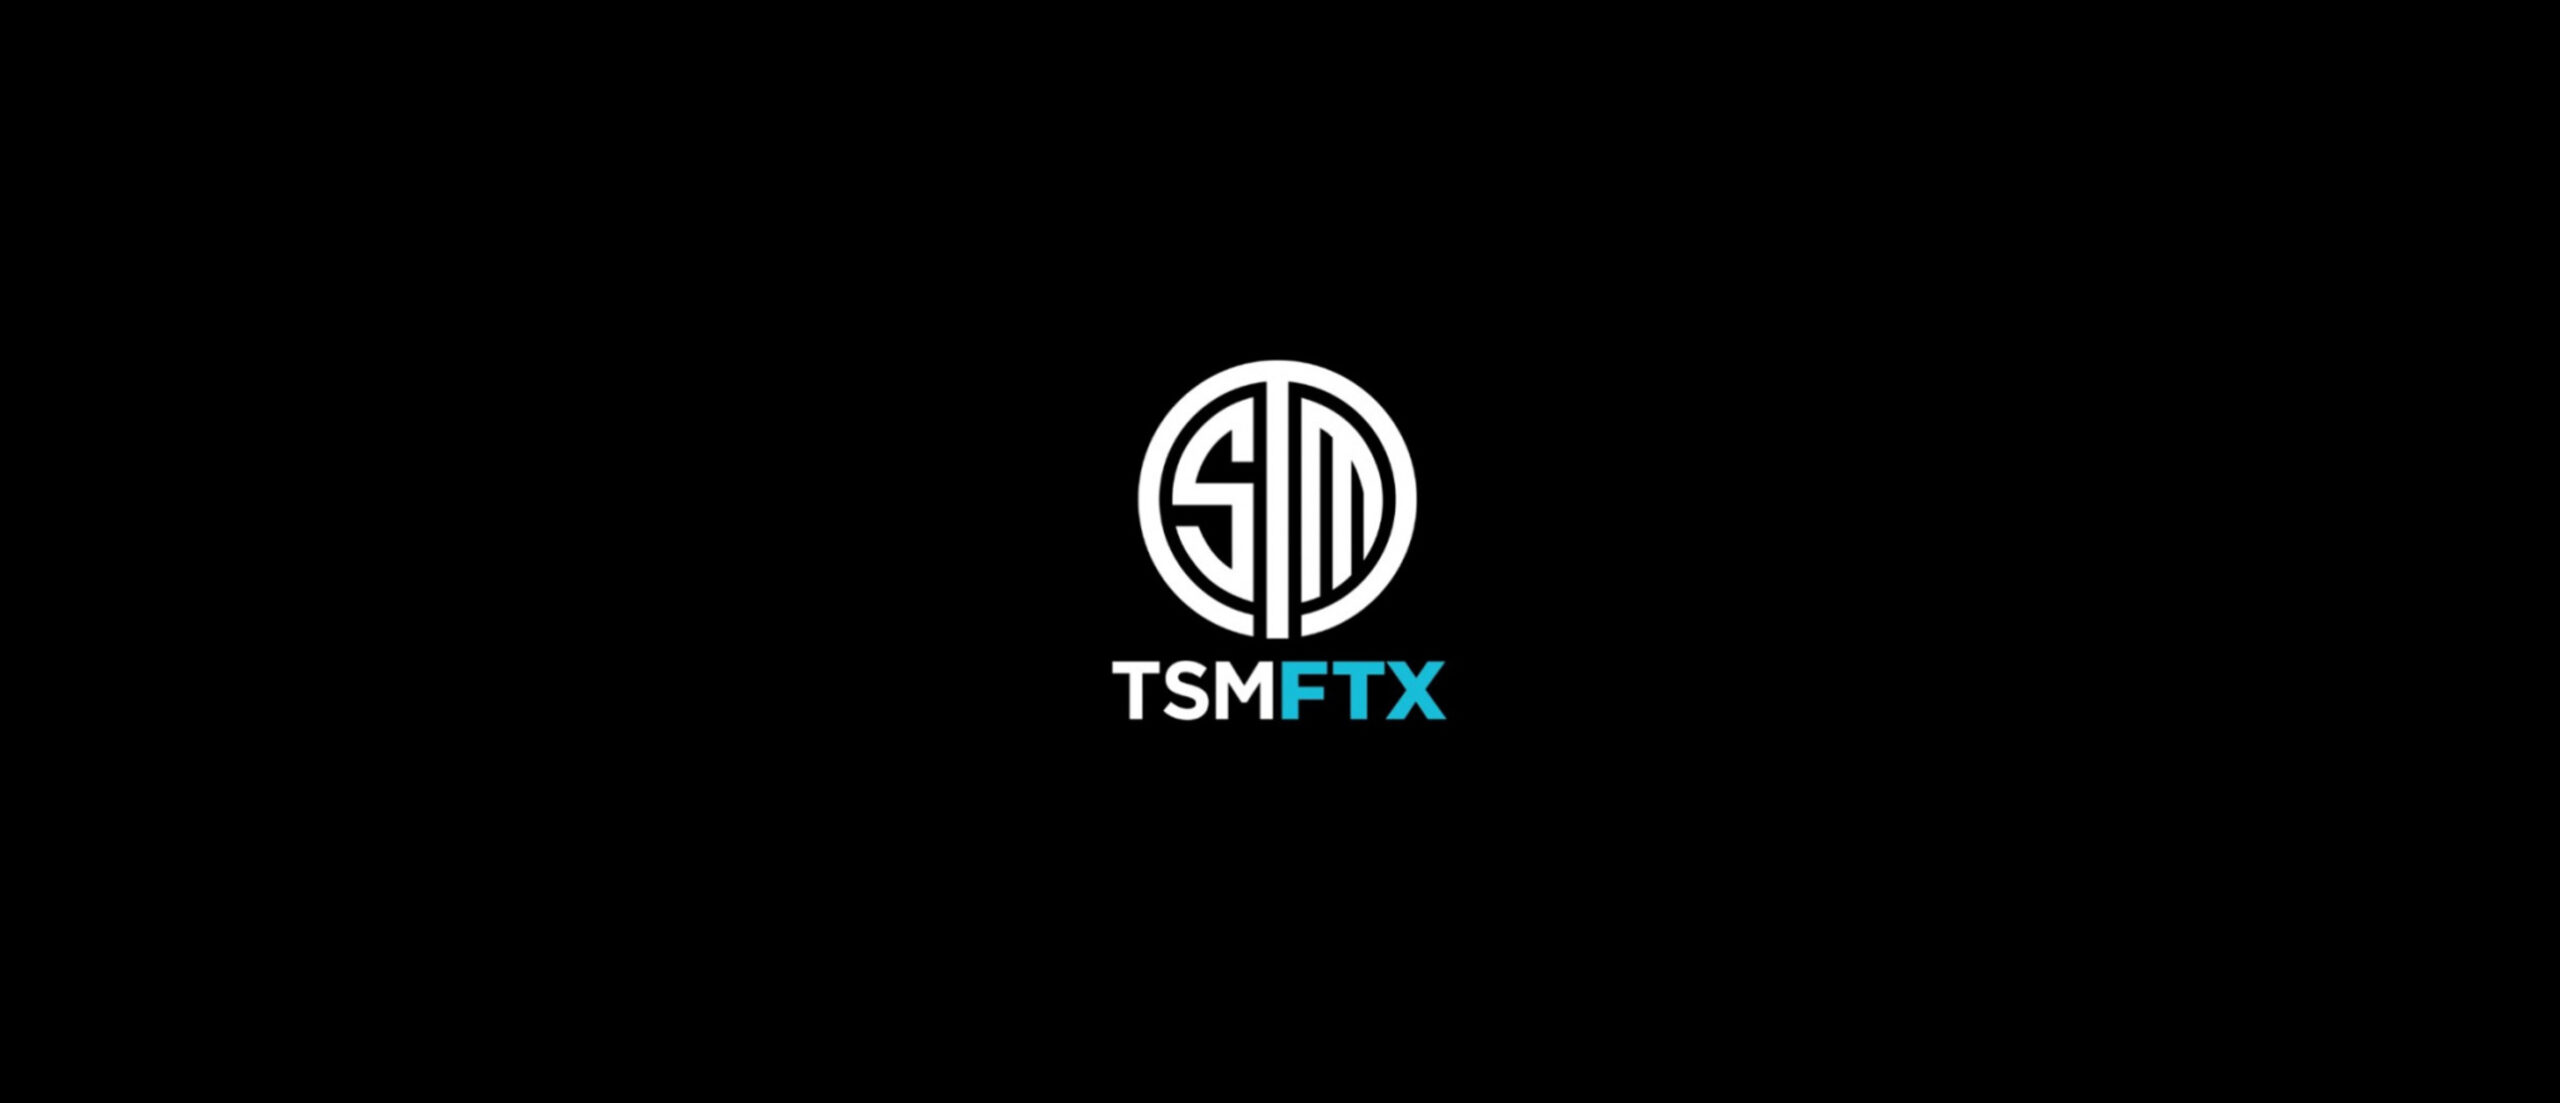 TSM wants to dominate in mobile esports industry globally